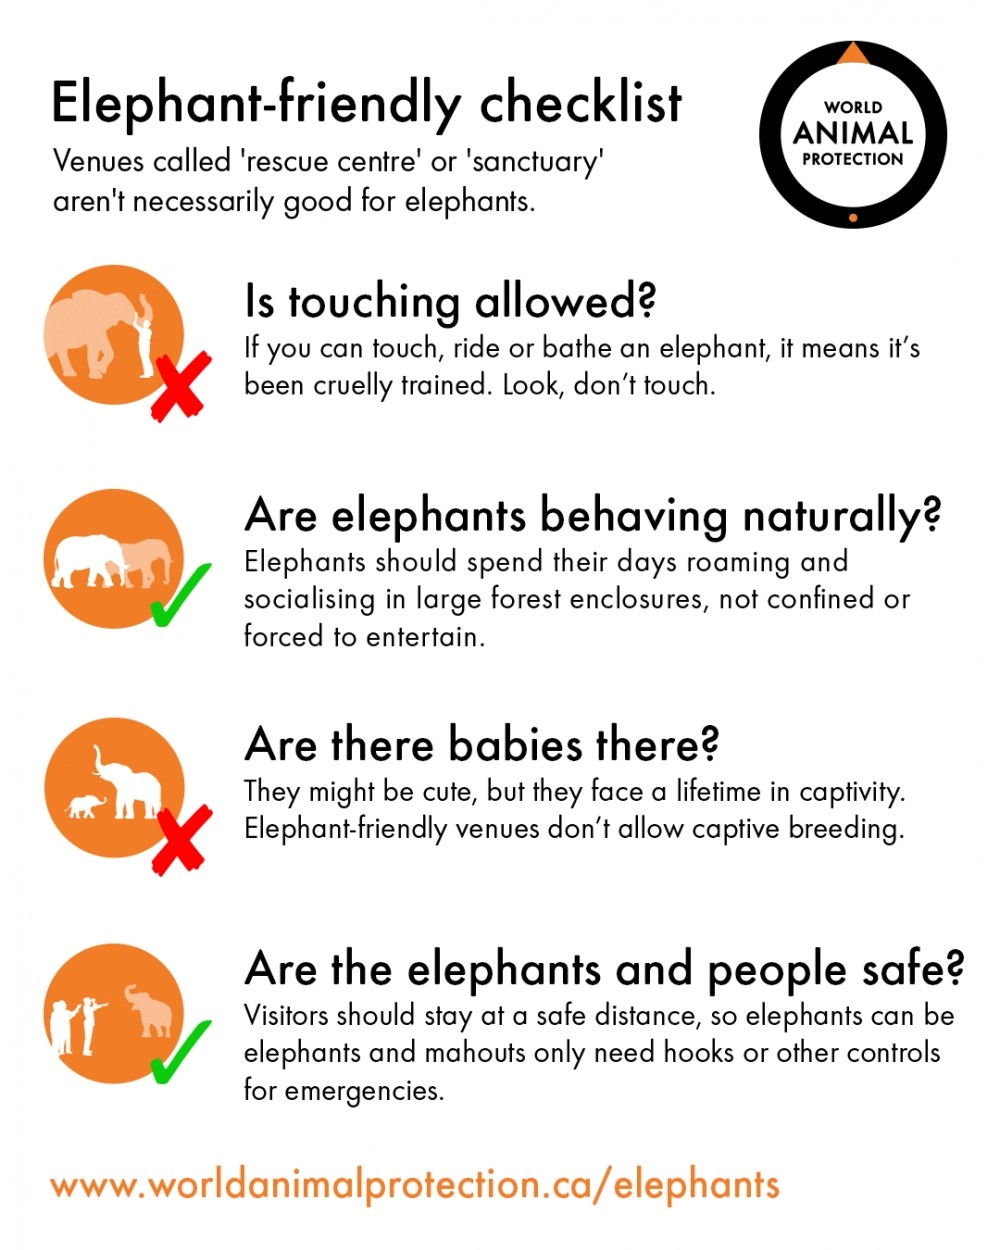 A checklist infographic on how to be an elephant friendly traveler